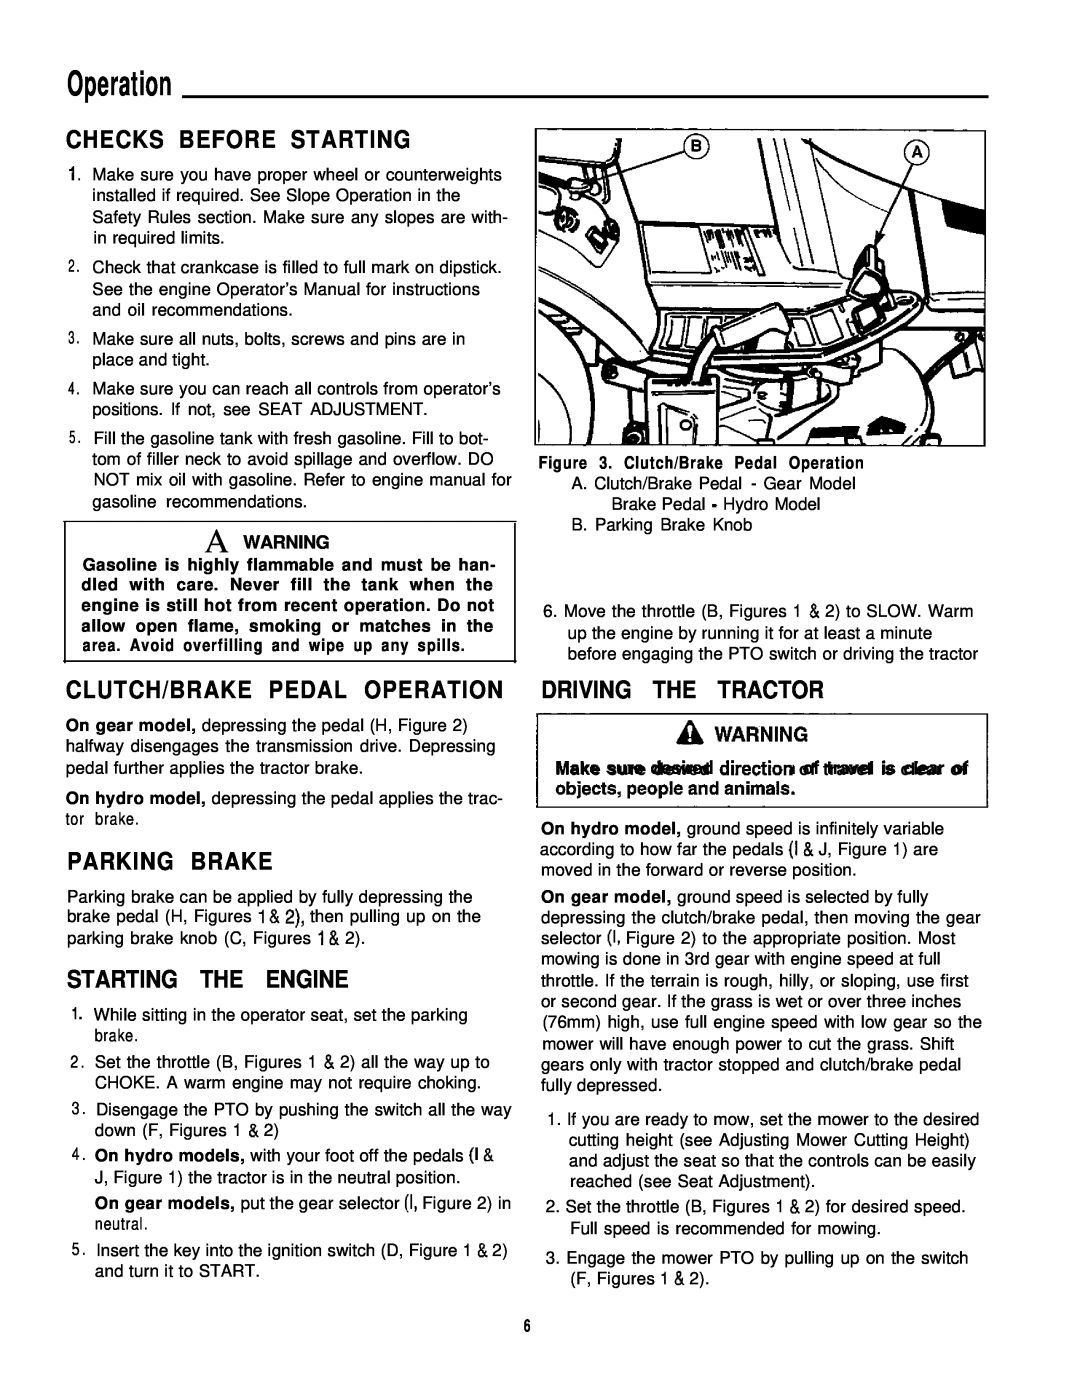 Simplicity 1693266, 1693264 Checks Before Starting, Clutch/Brake Pedal Operation, Parking Brake, Starting The Engine 